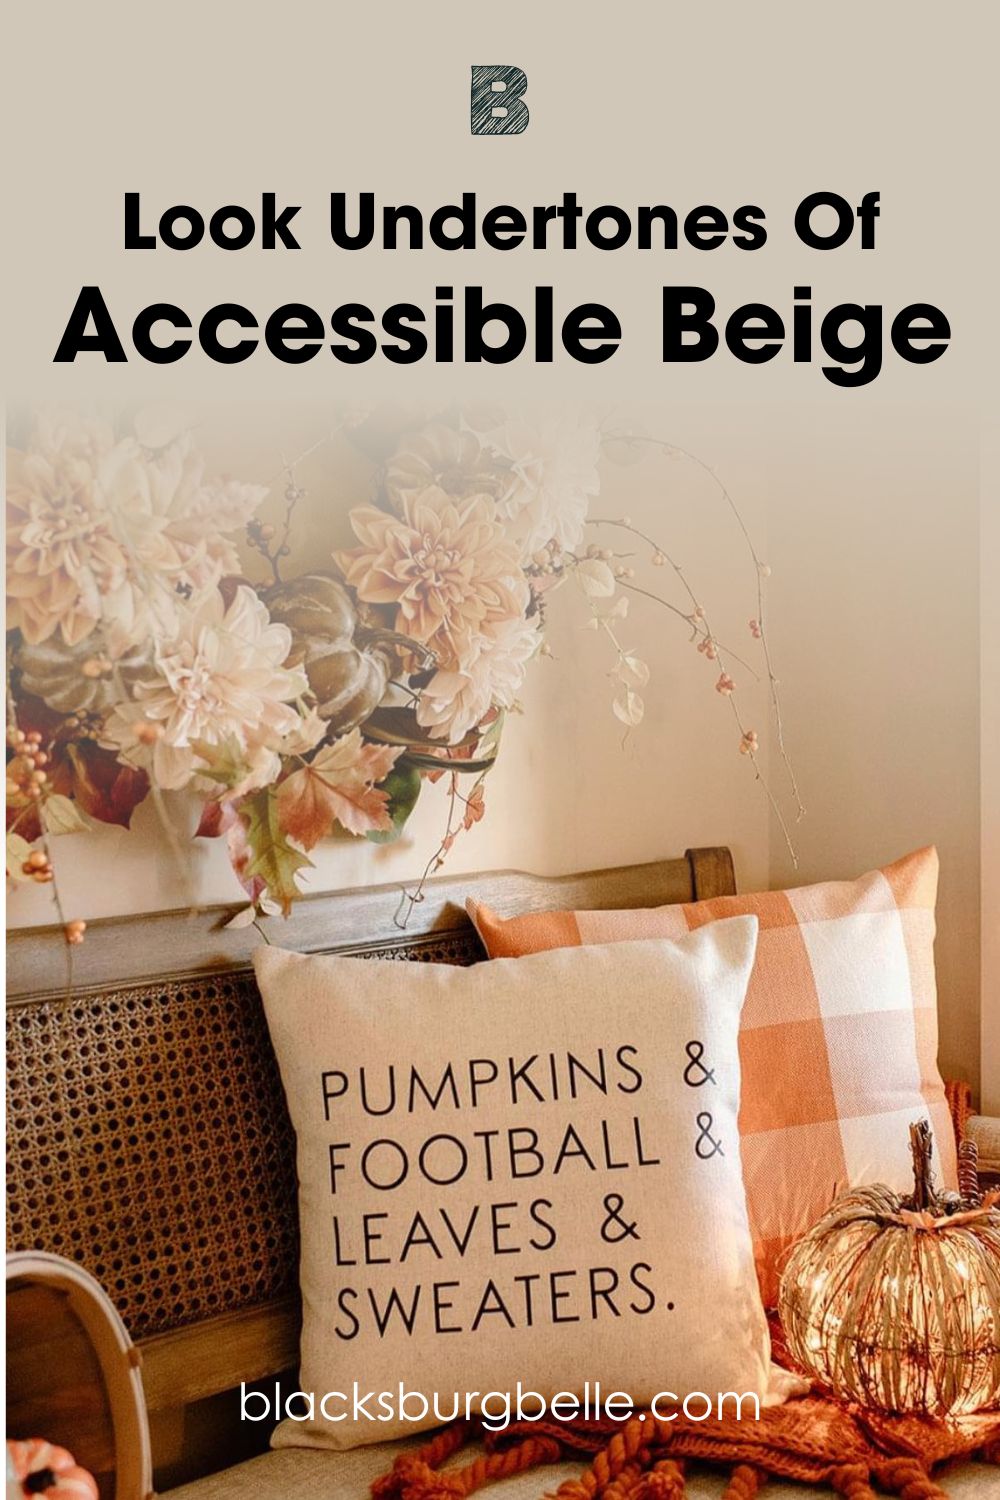 A Closer Look at the Undertones in Accessible Beige